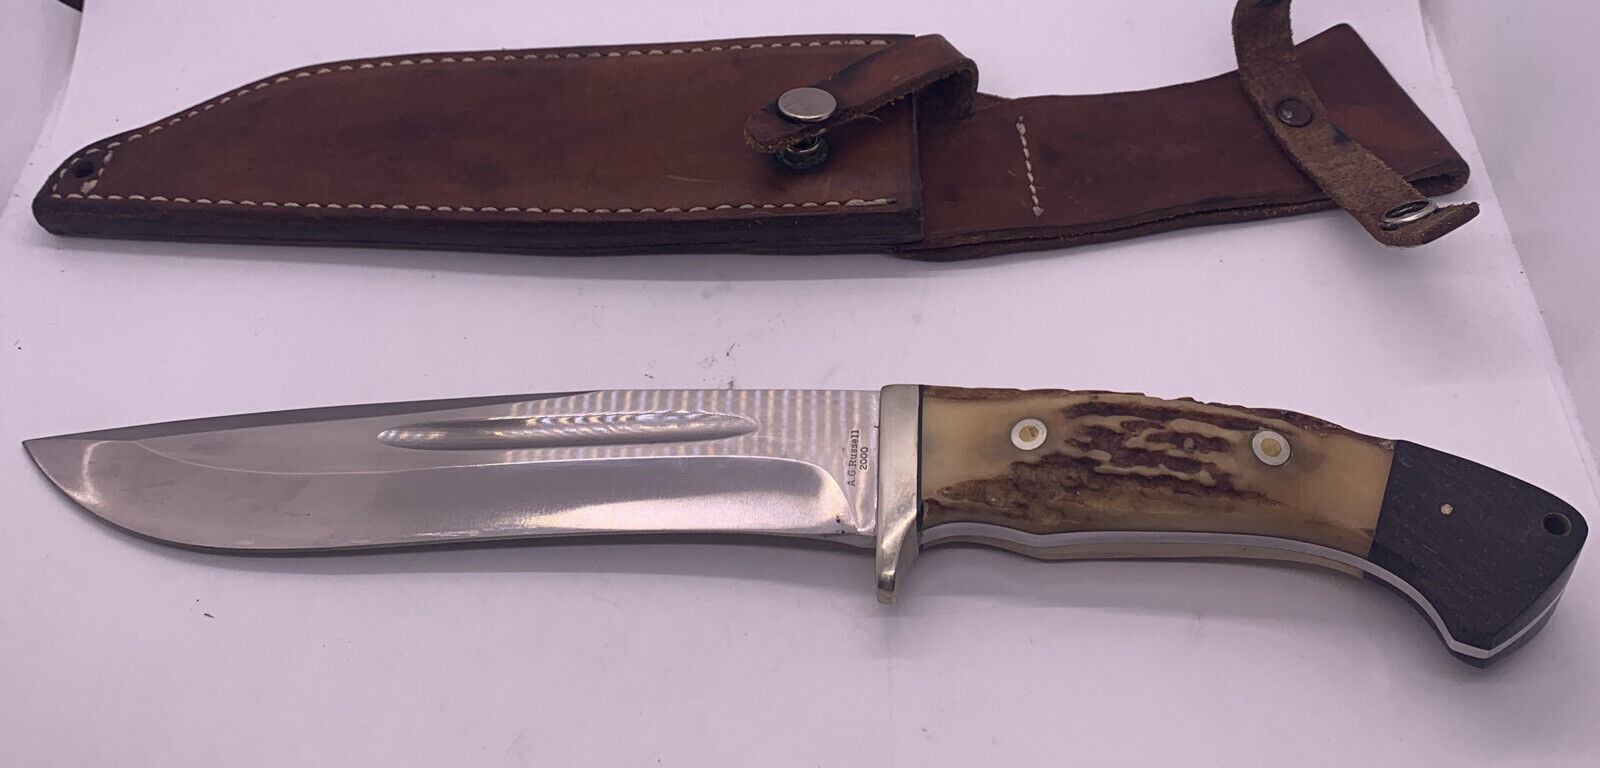 A.G. Russell 2000 Aus-8 Fixed Blade Stag Knife With Sheath